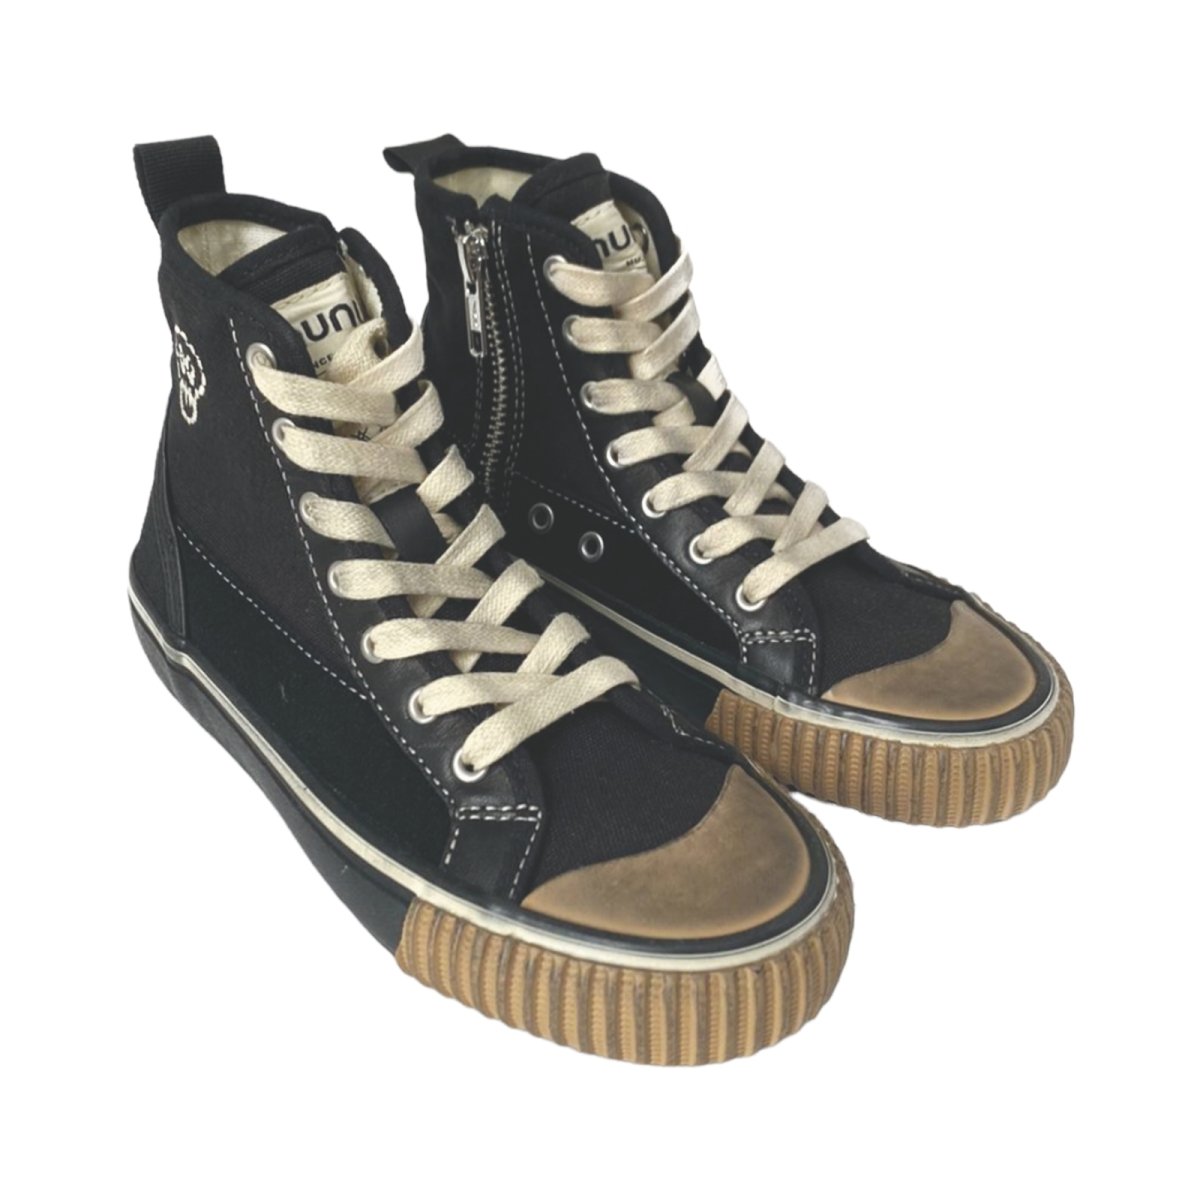 MIXED LEATHER HIGH TOP SNEAKERS - SNEAKERS